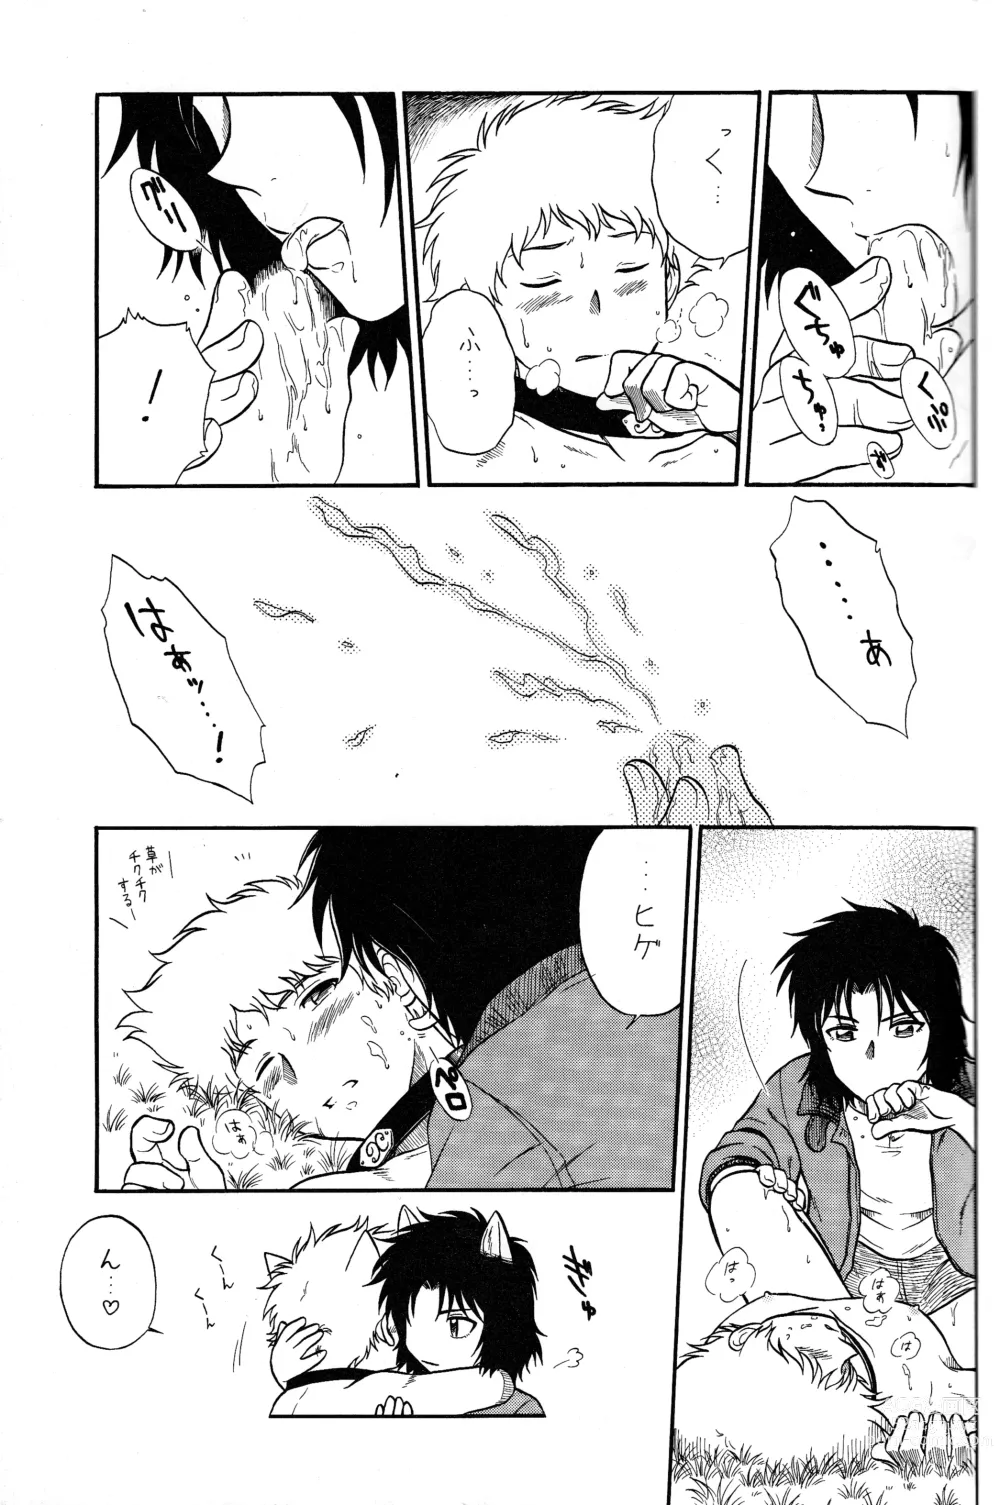 Page 15 of doujinshi K to H